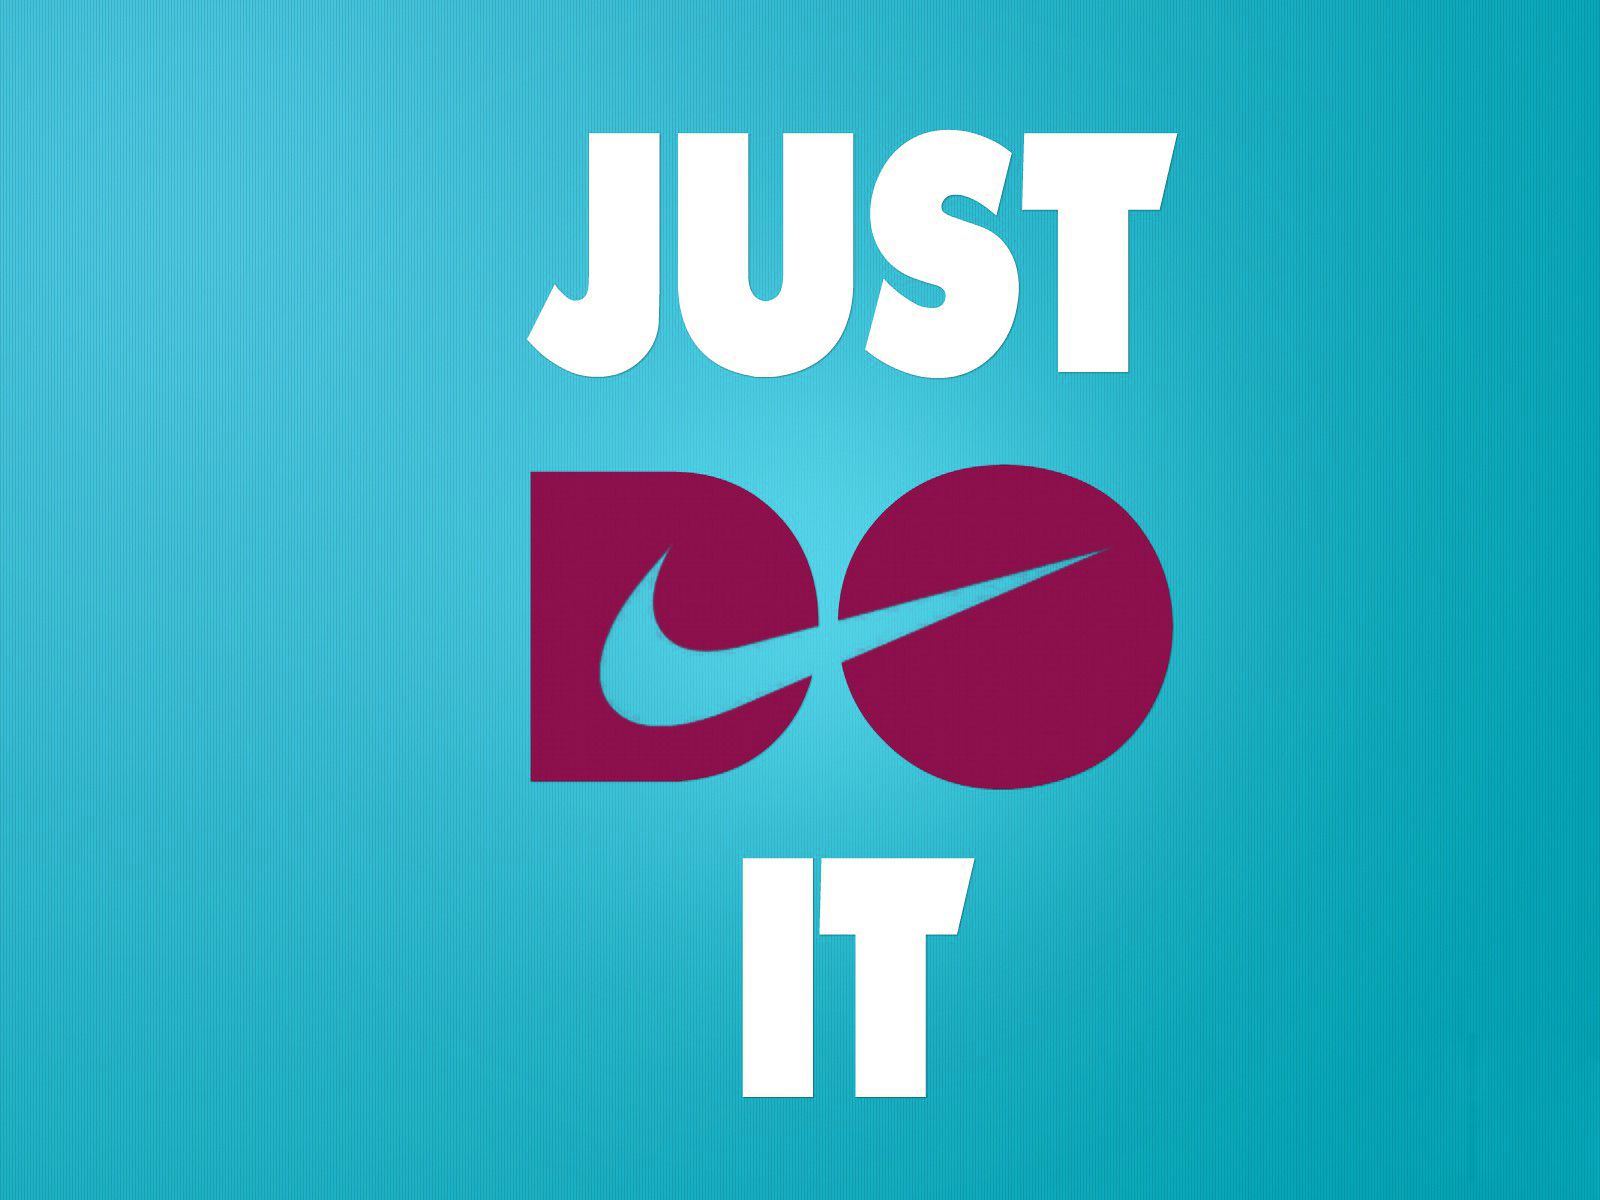 You can do it HD wallpapers  Pxfuel